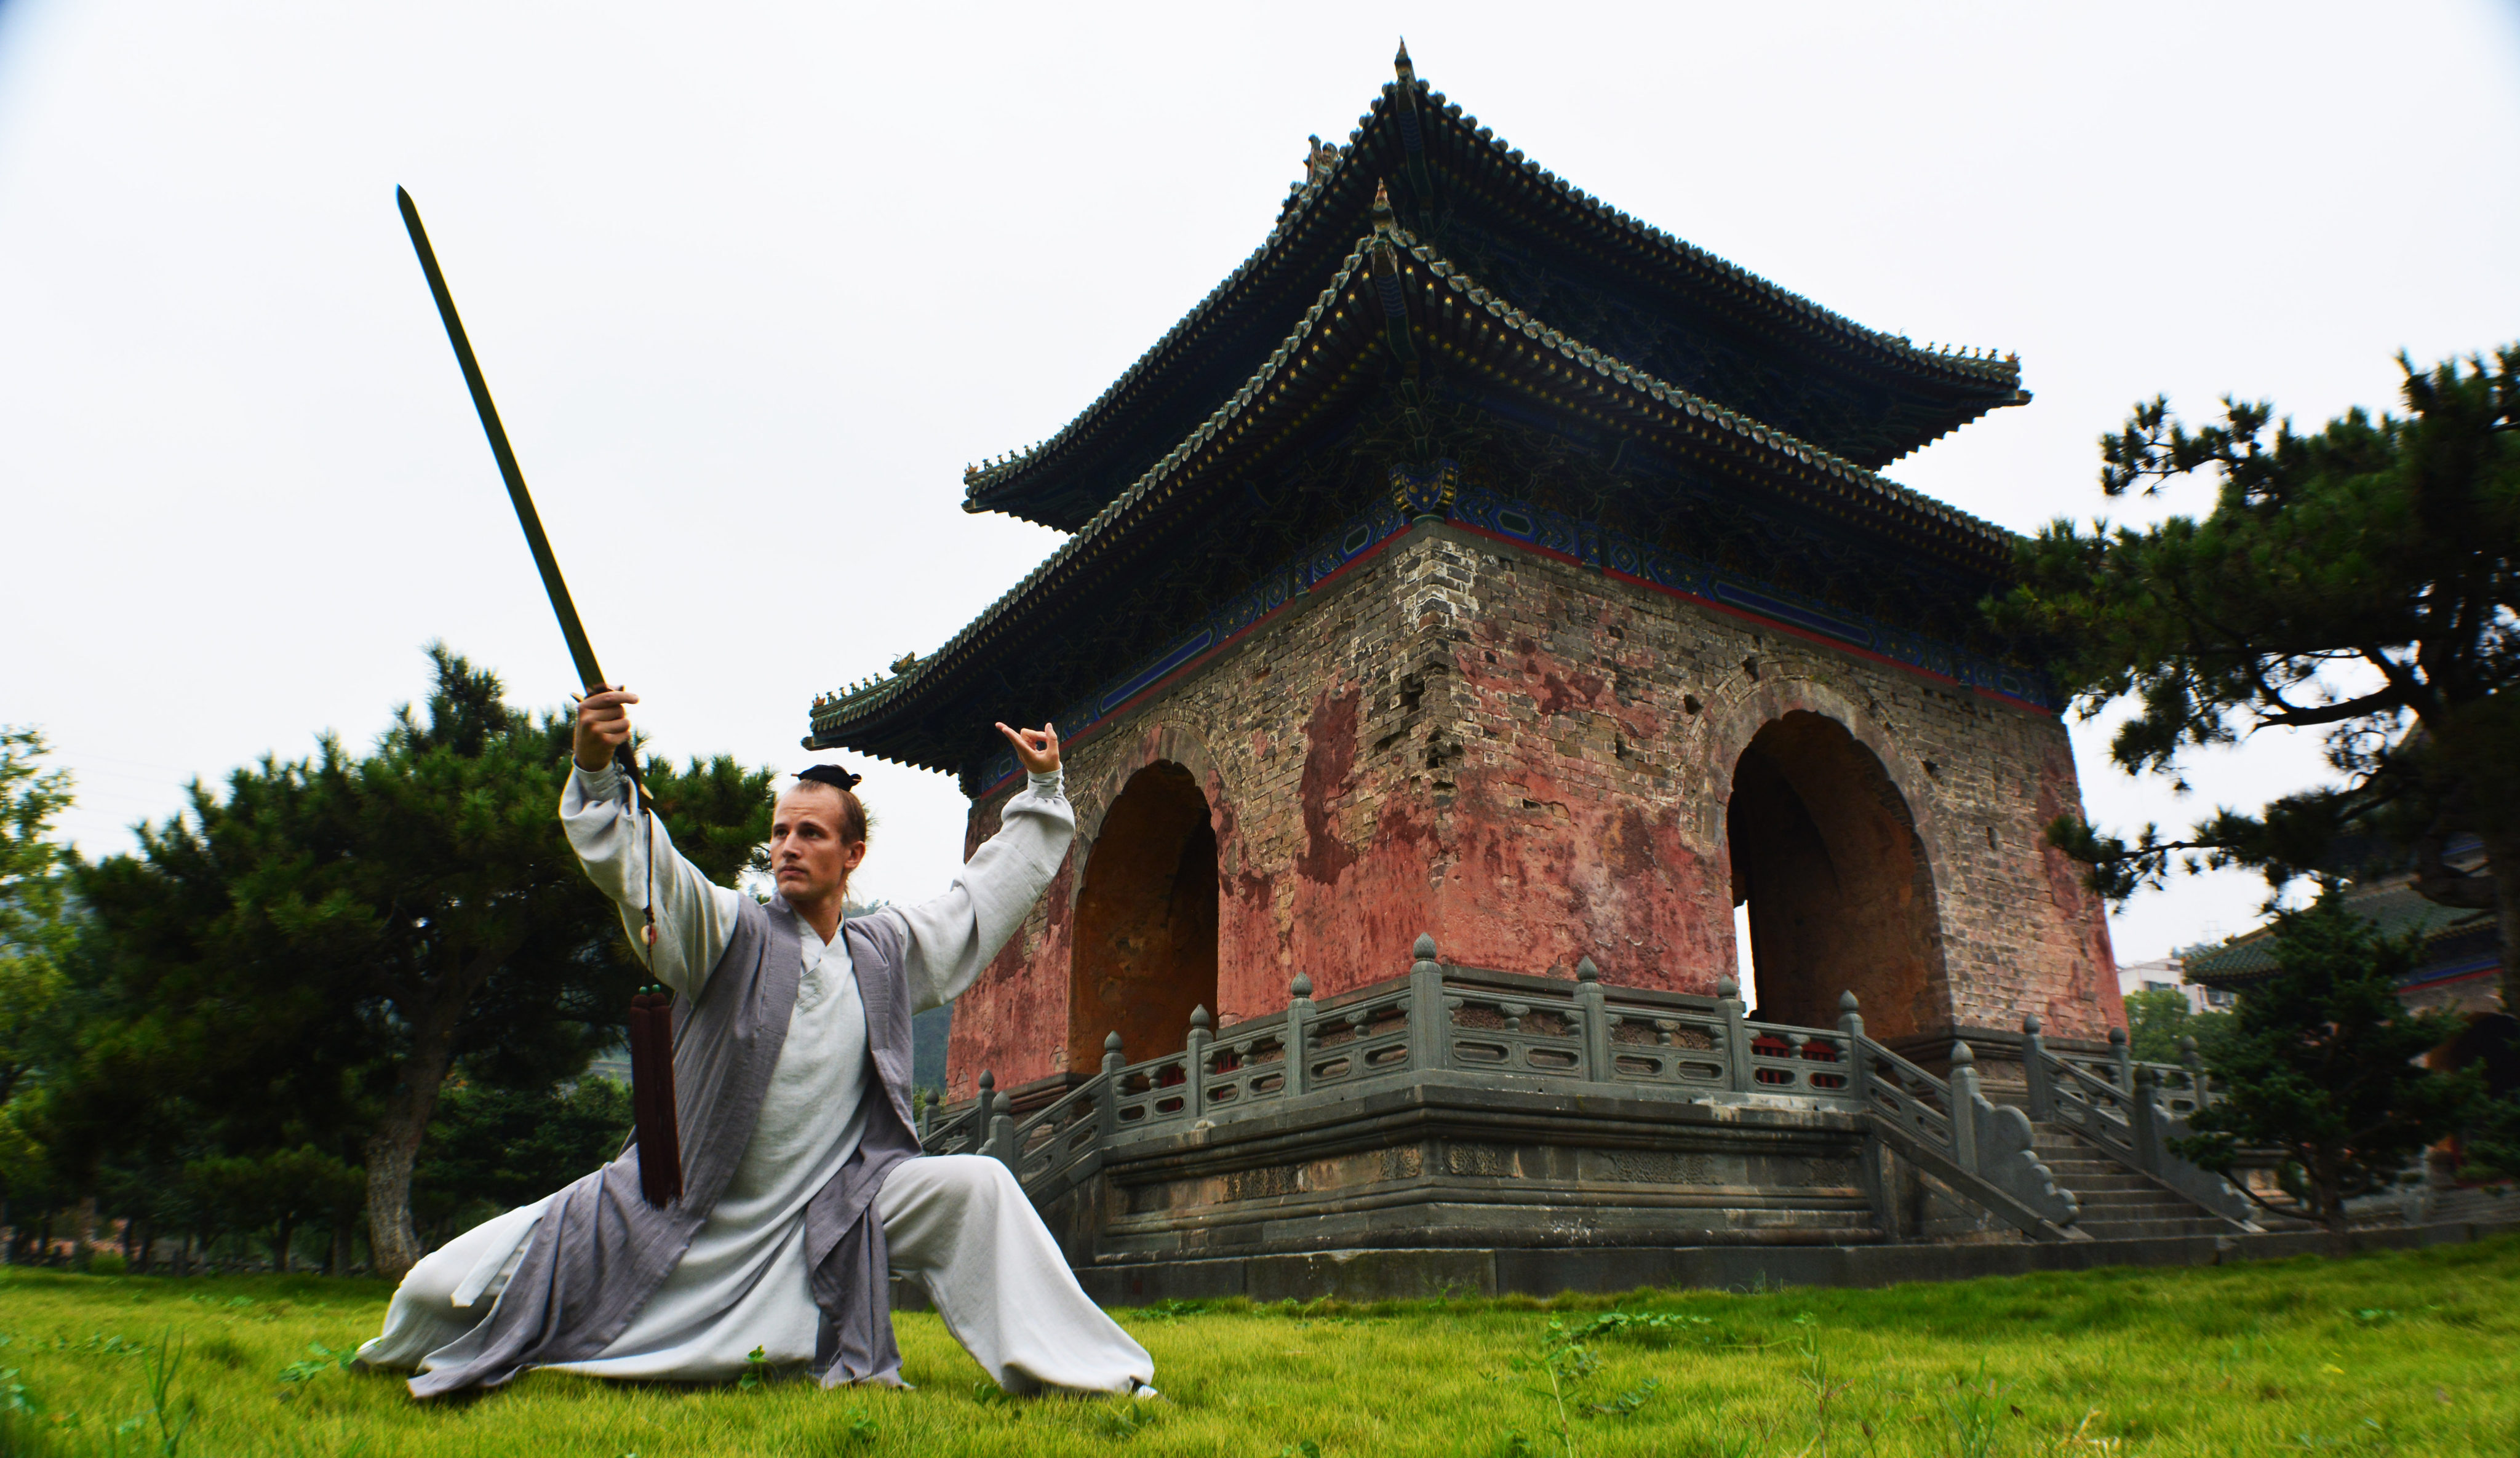 Jake Pinnick left Illinois to find himself, and ended up in China’s Wudang Mountains practising kung fu and Daoism. Photo: Handout